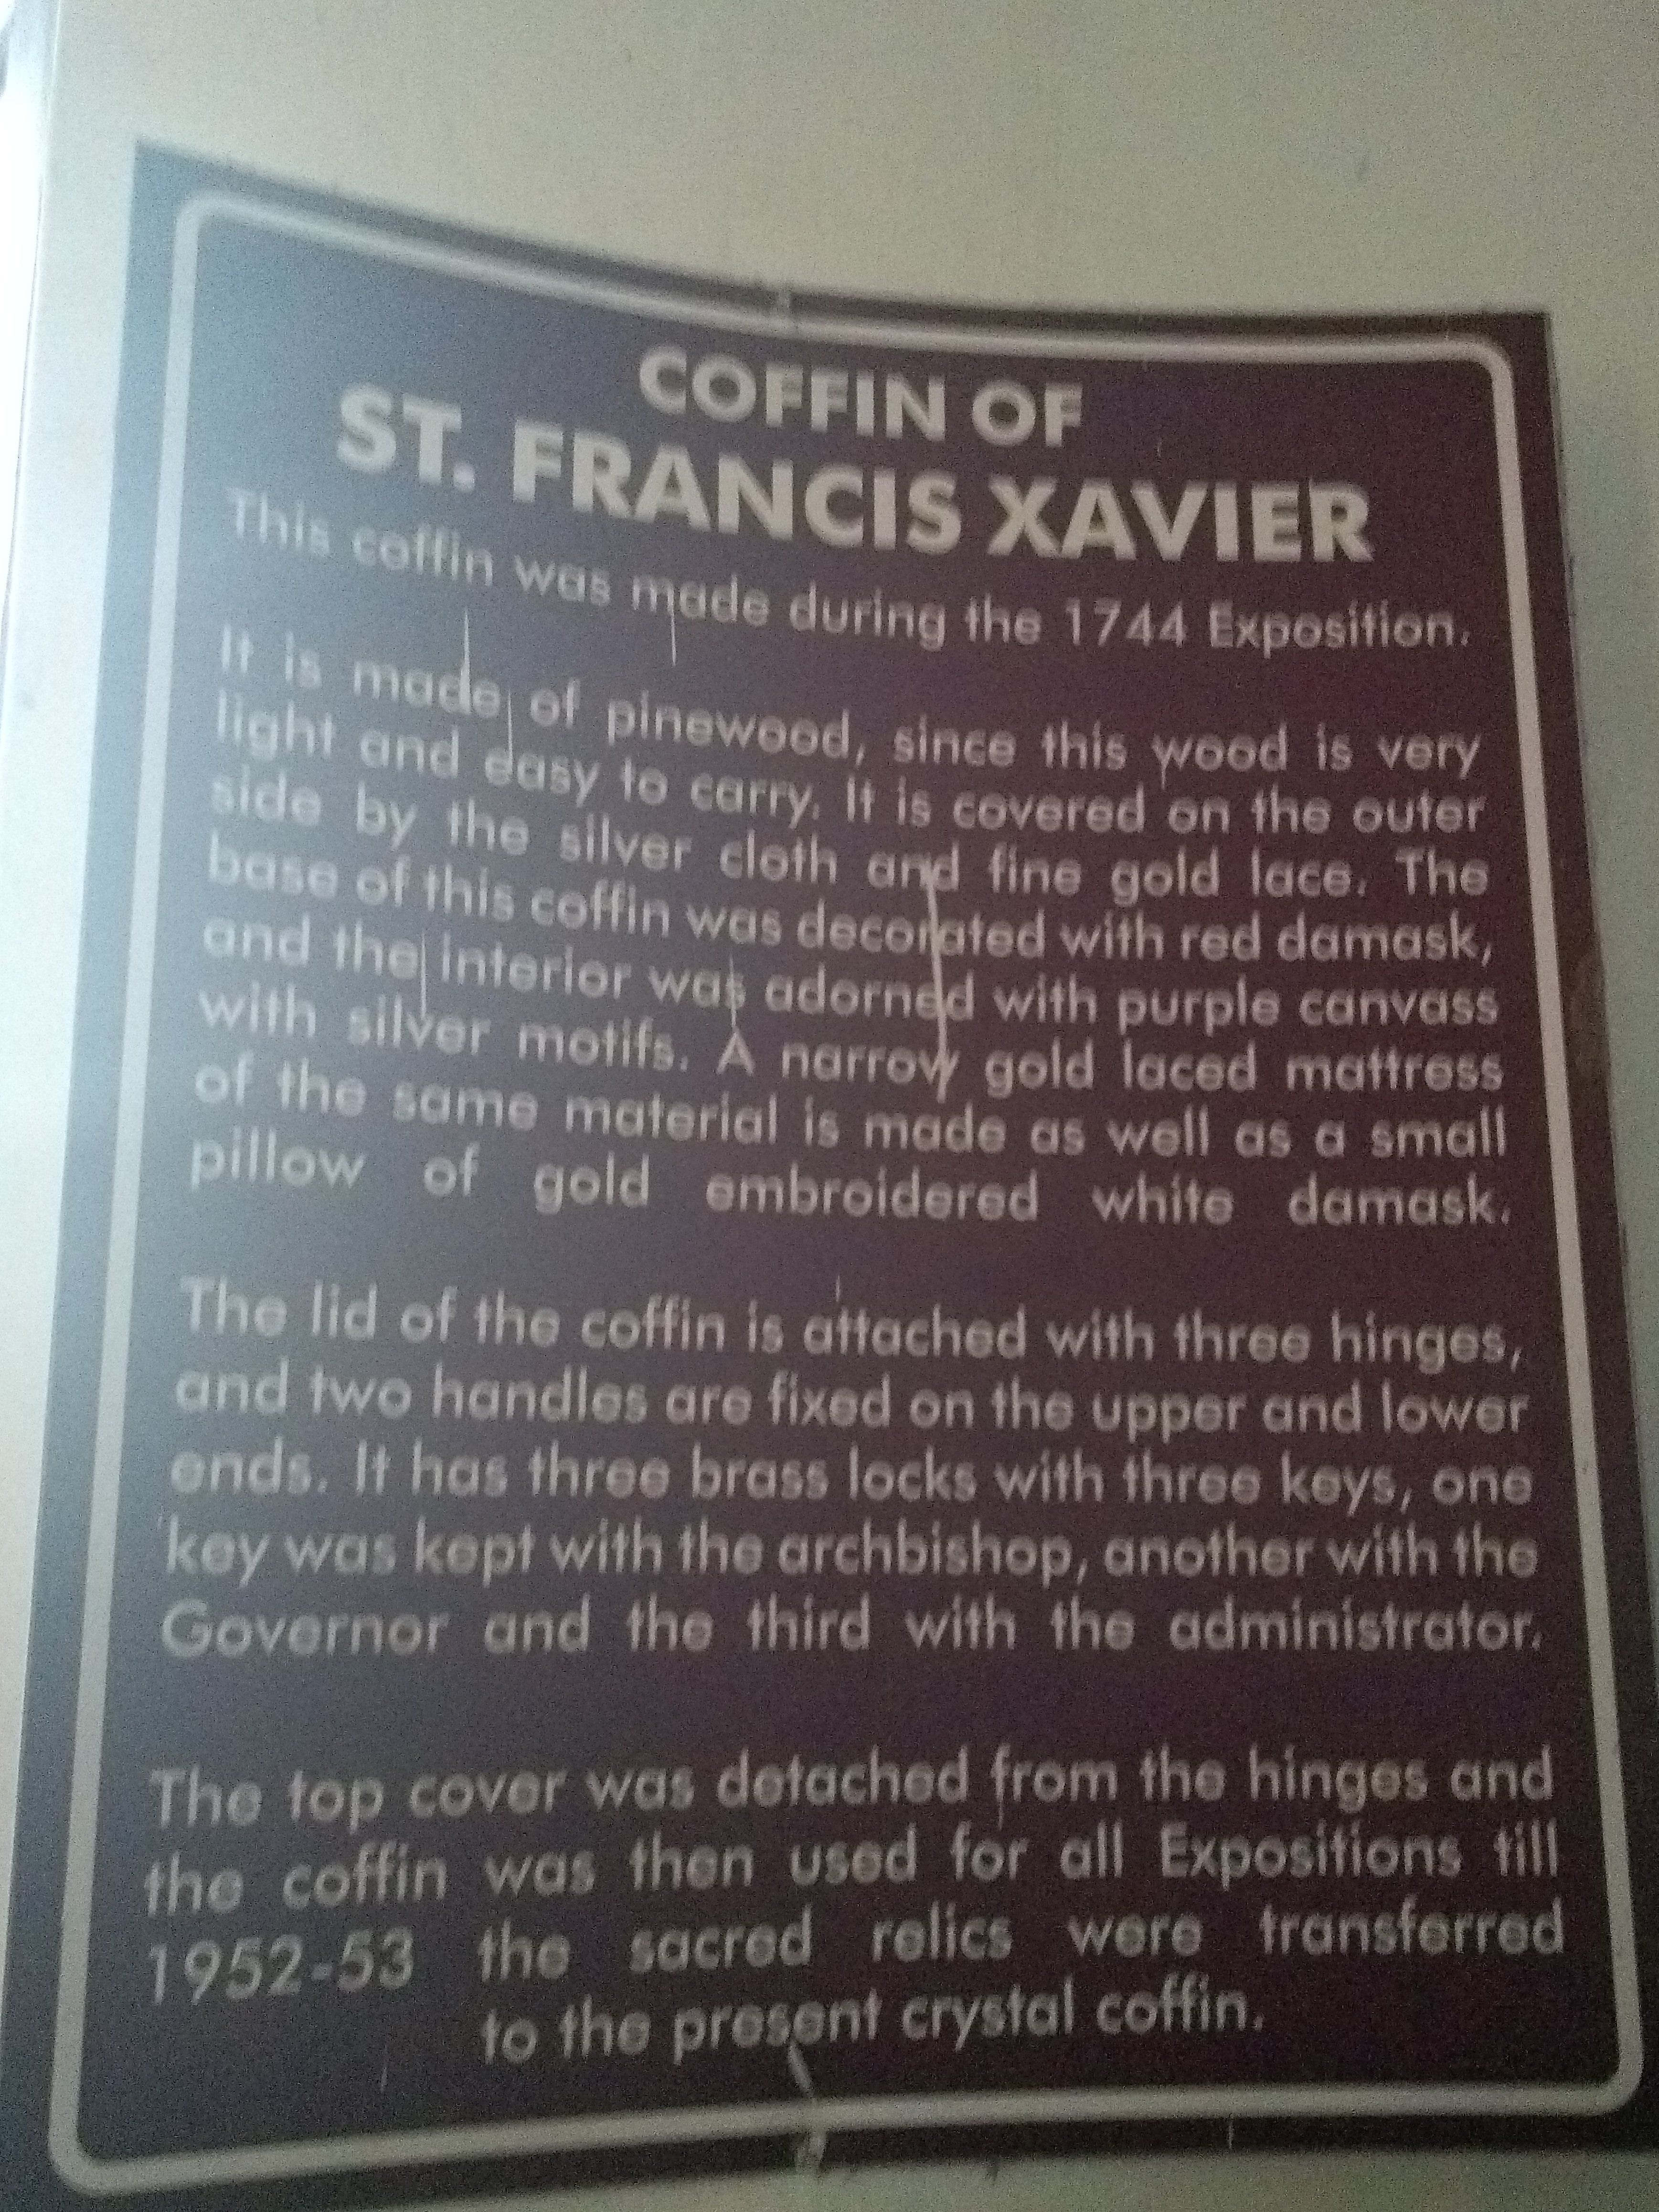 Writting about St. francis Xavier's Coffin